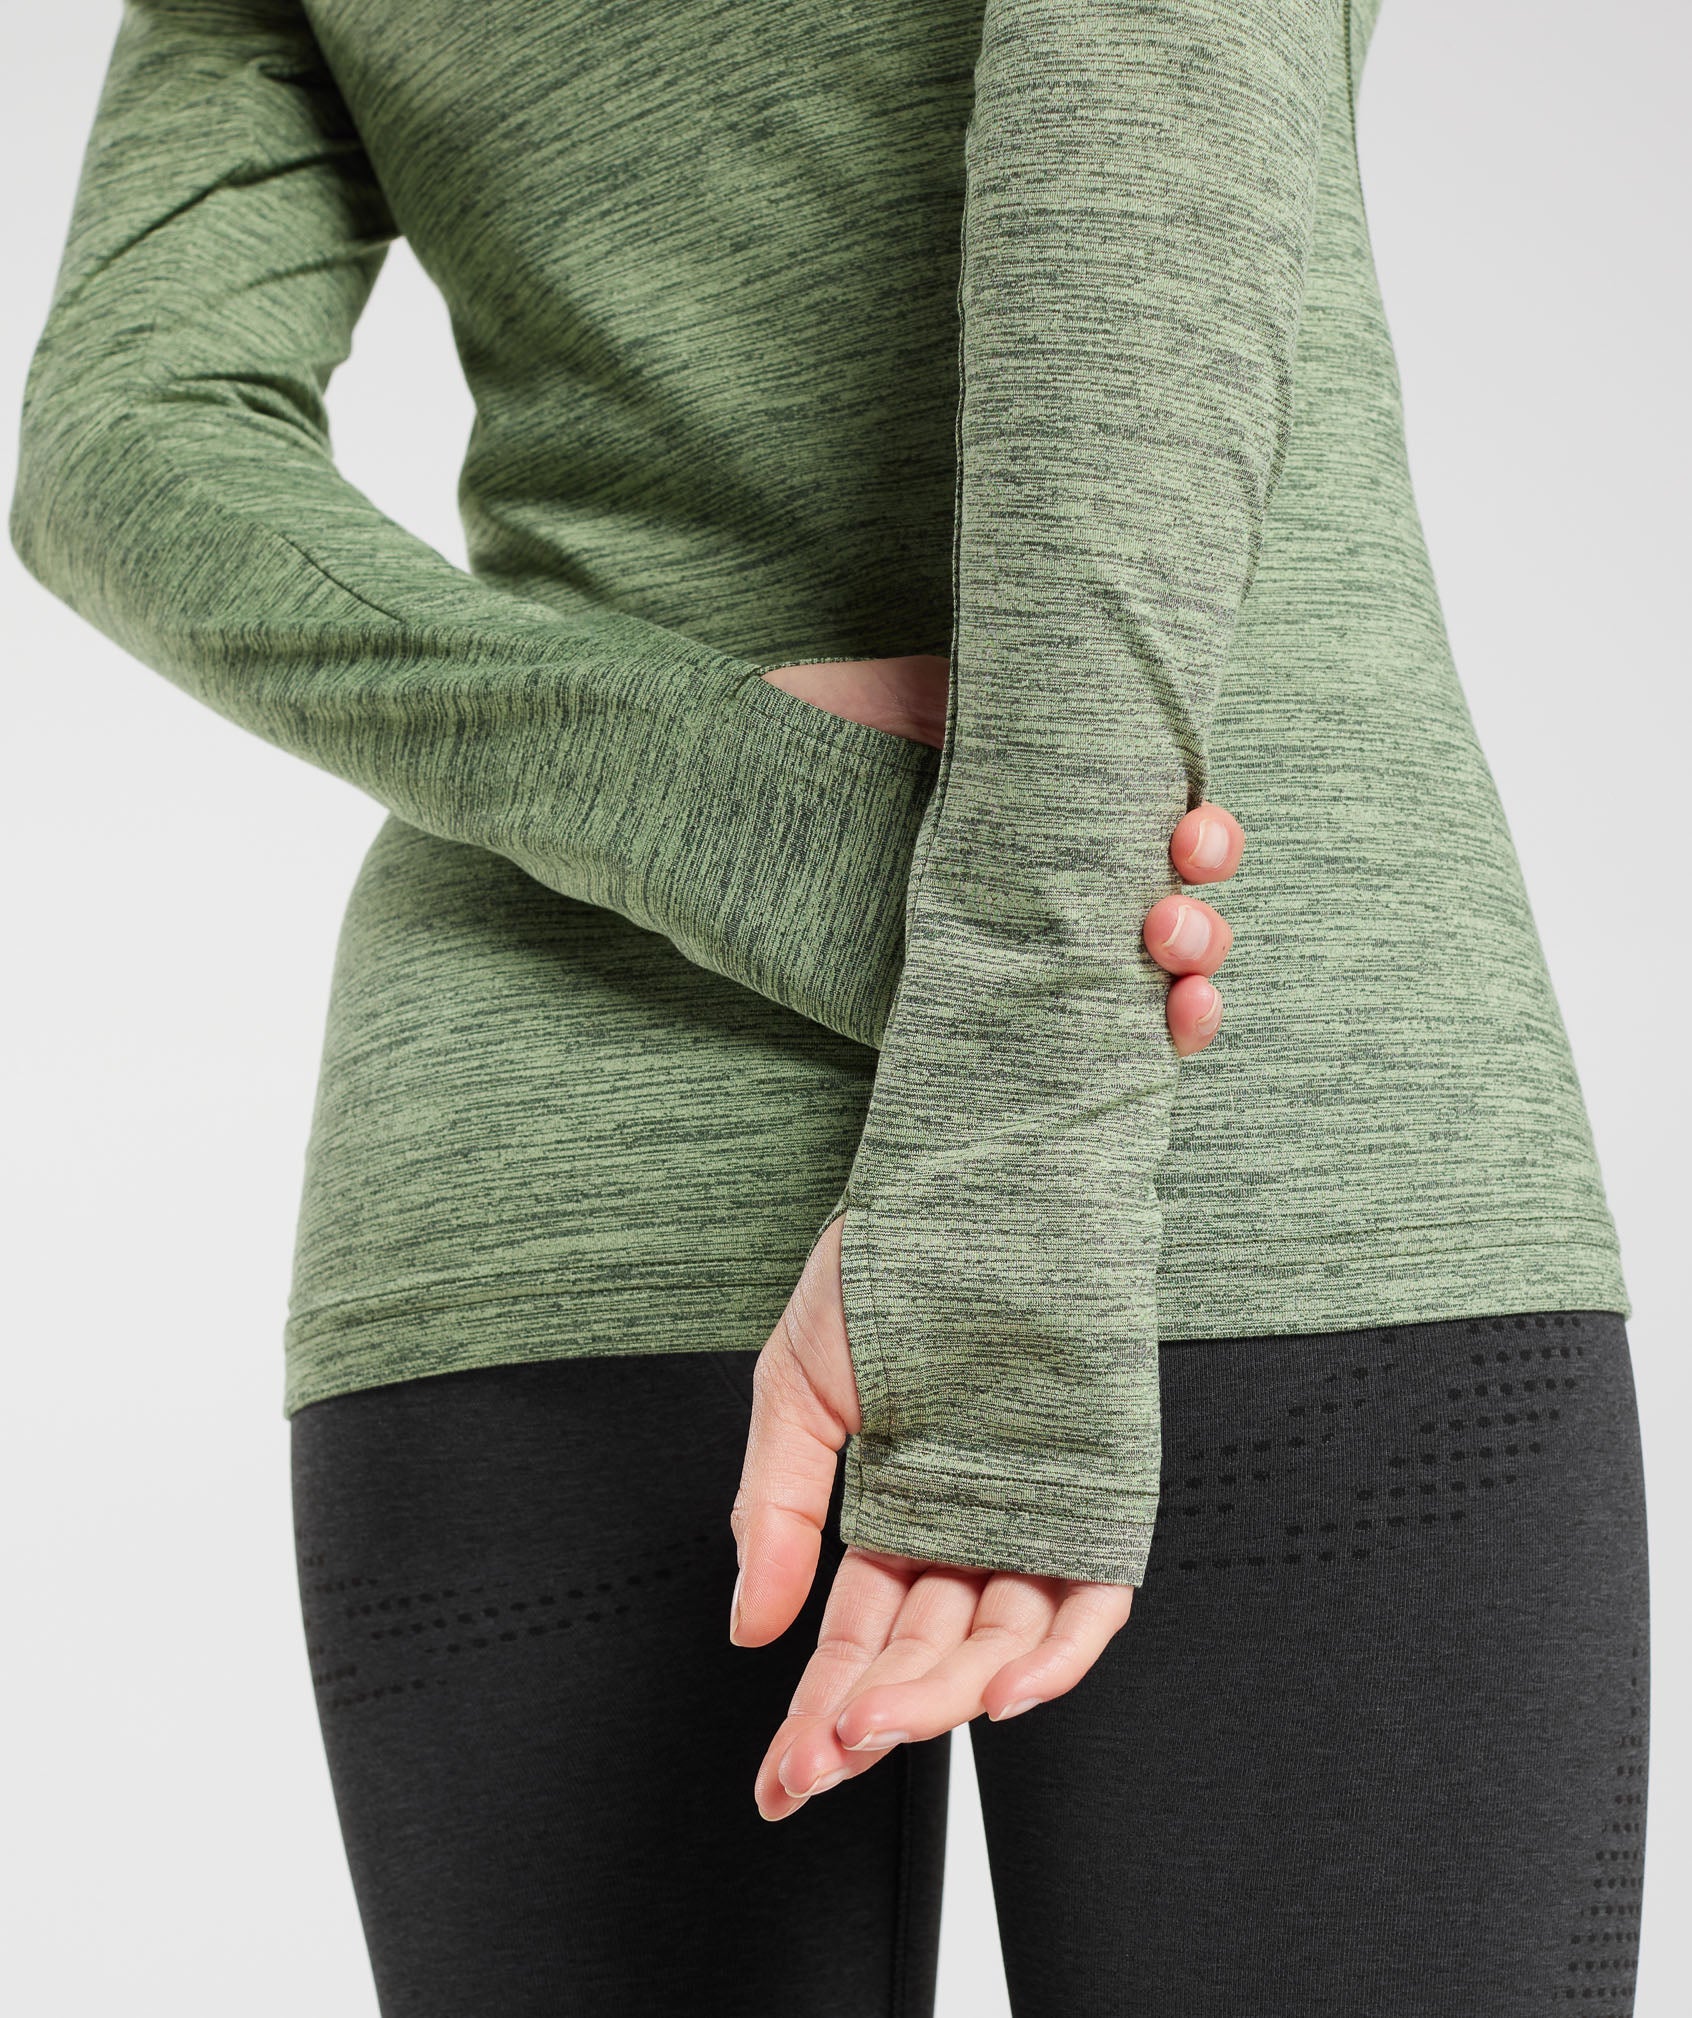 Fleece Lined Long Sleeve Top in Winter Olive/Light Sage Green - view 6